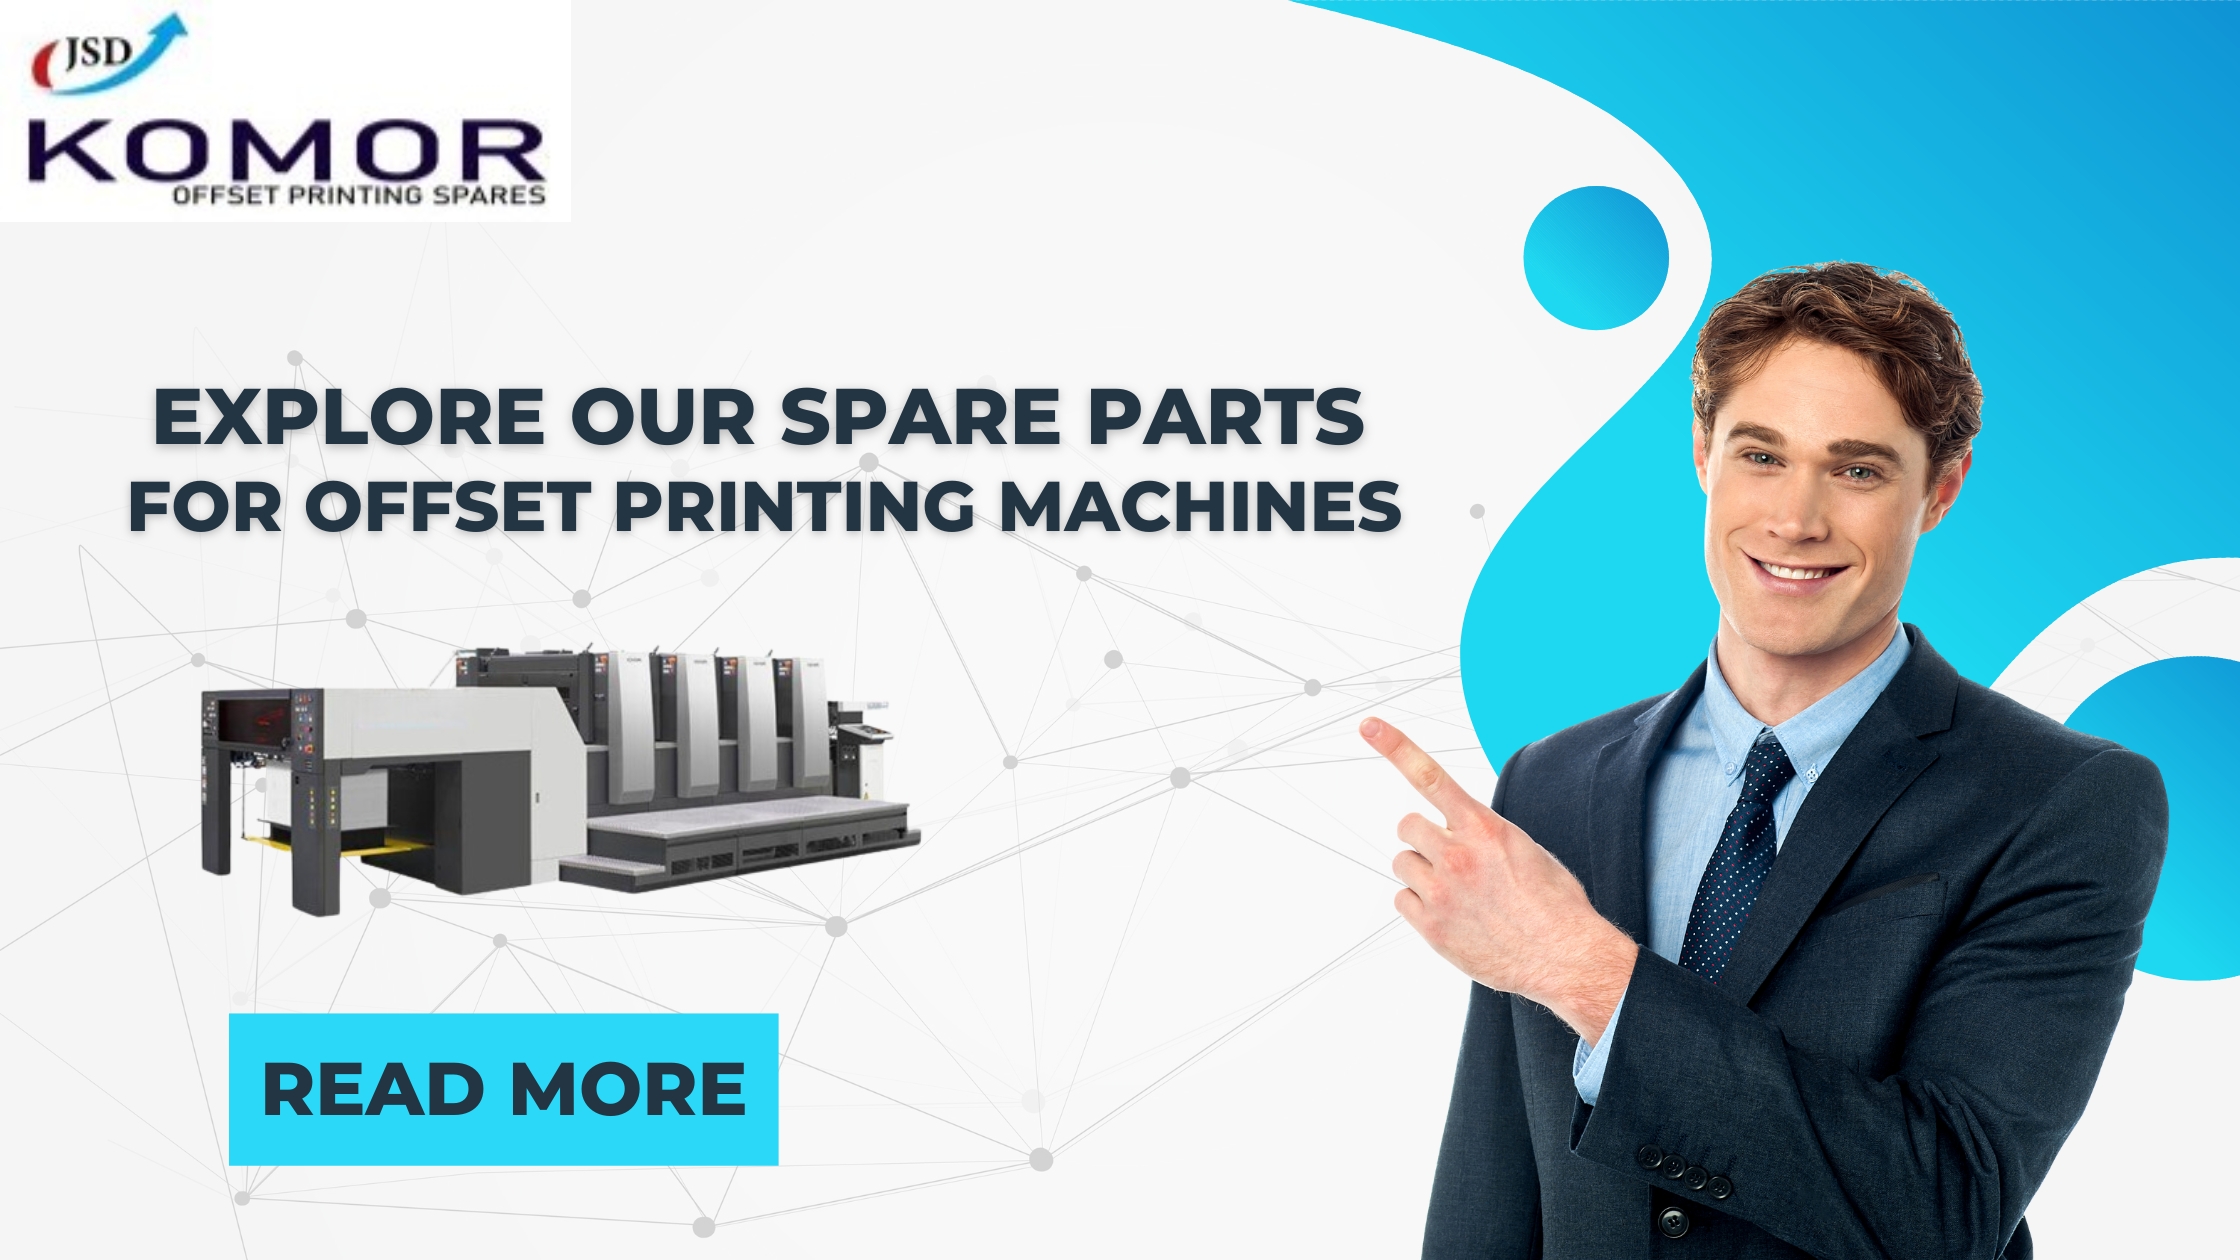 Explore Our Spare Parts for Offset Printing Machines